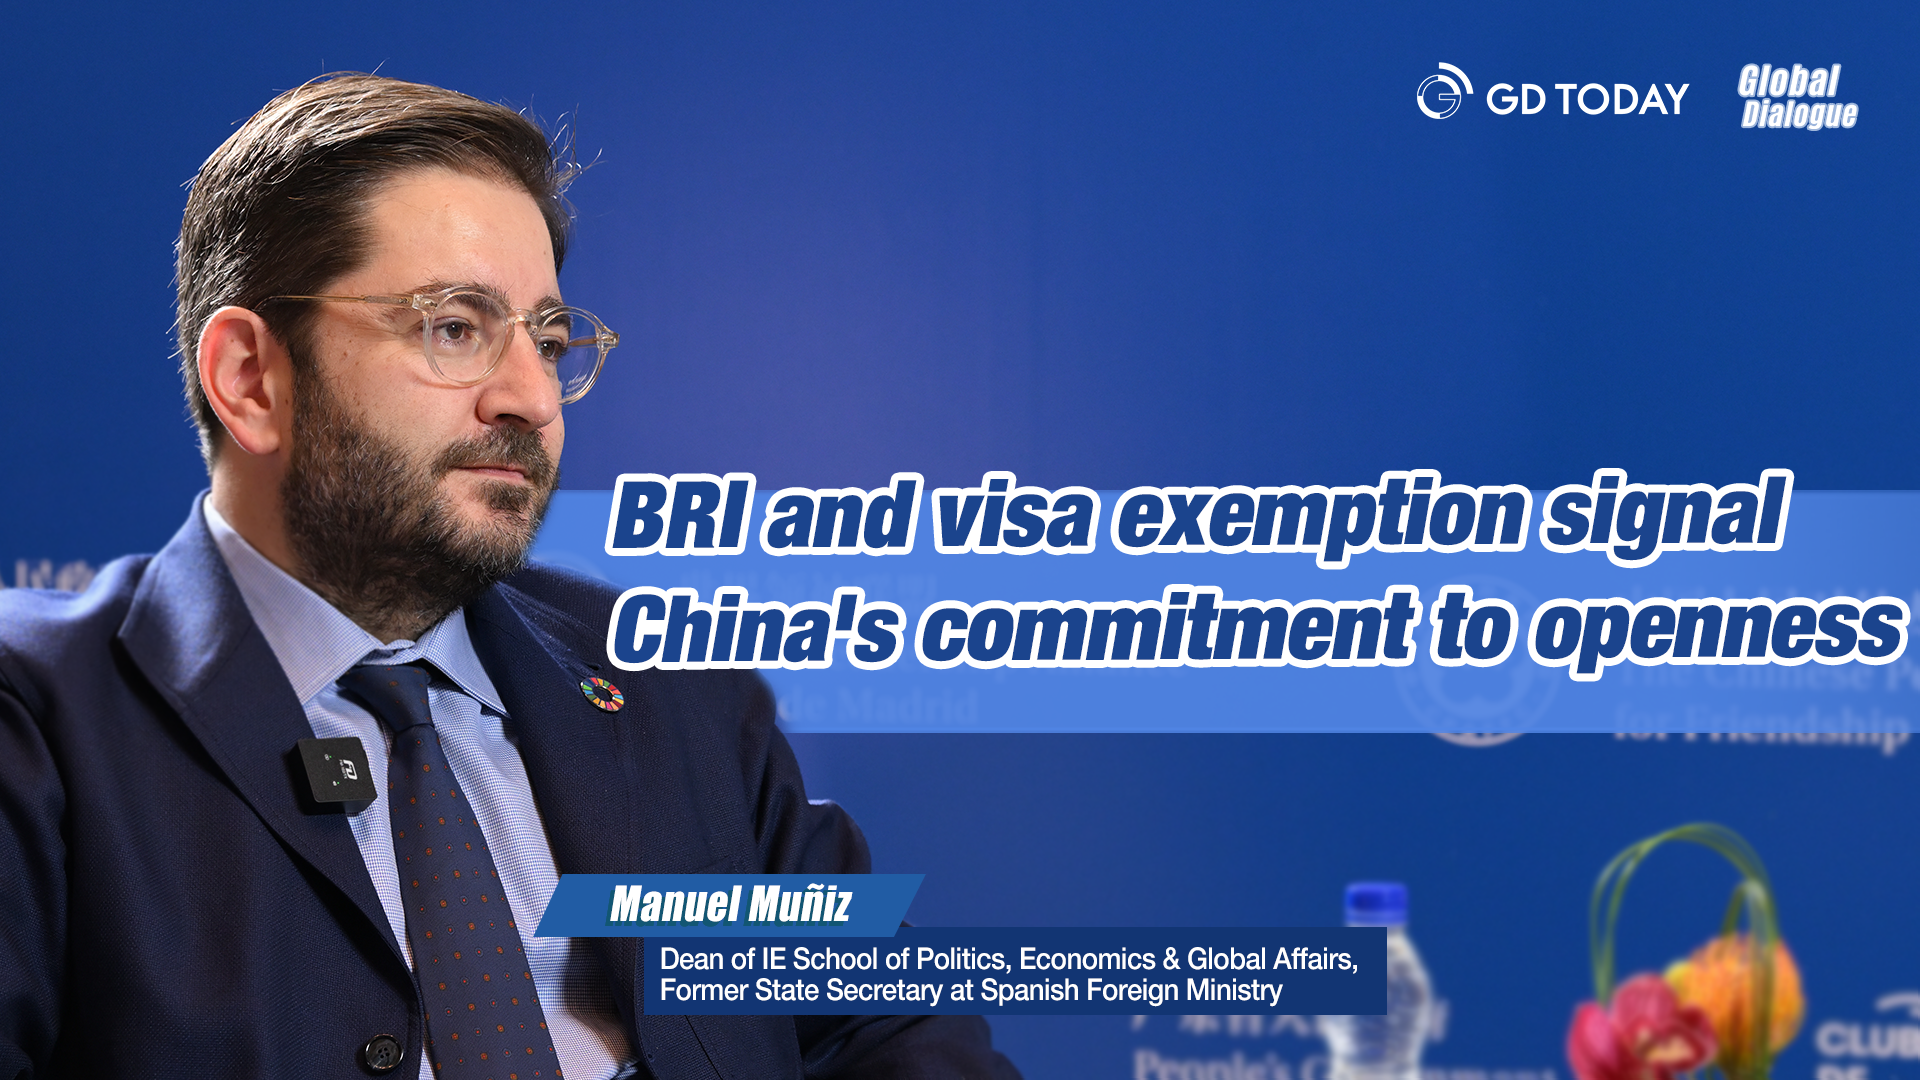 BRI and visa exemption signal China's commitment to openness: Spanish expert